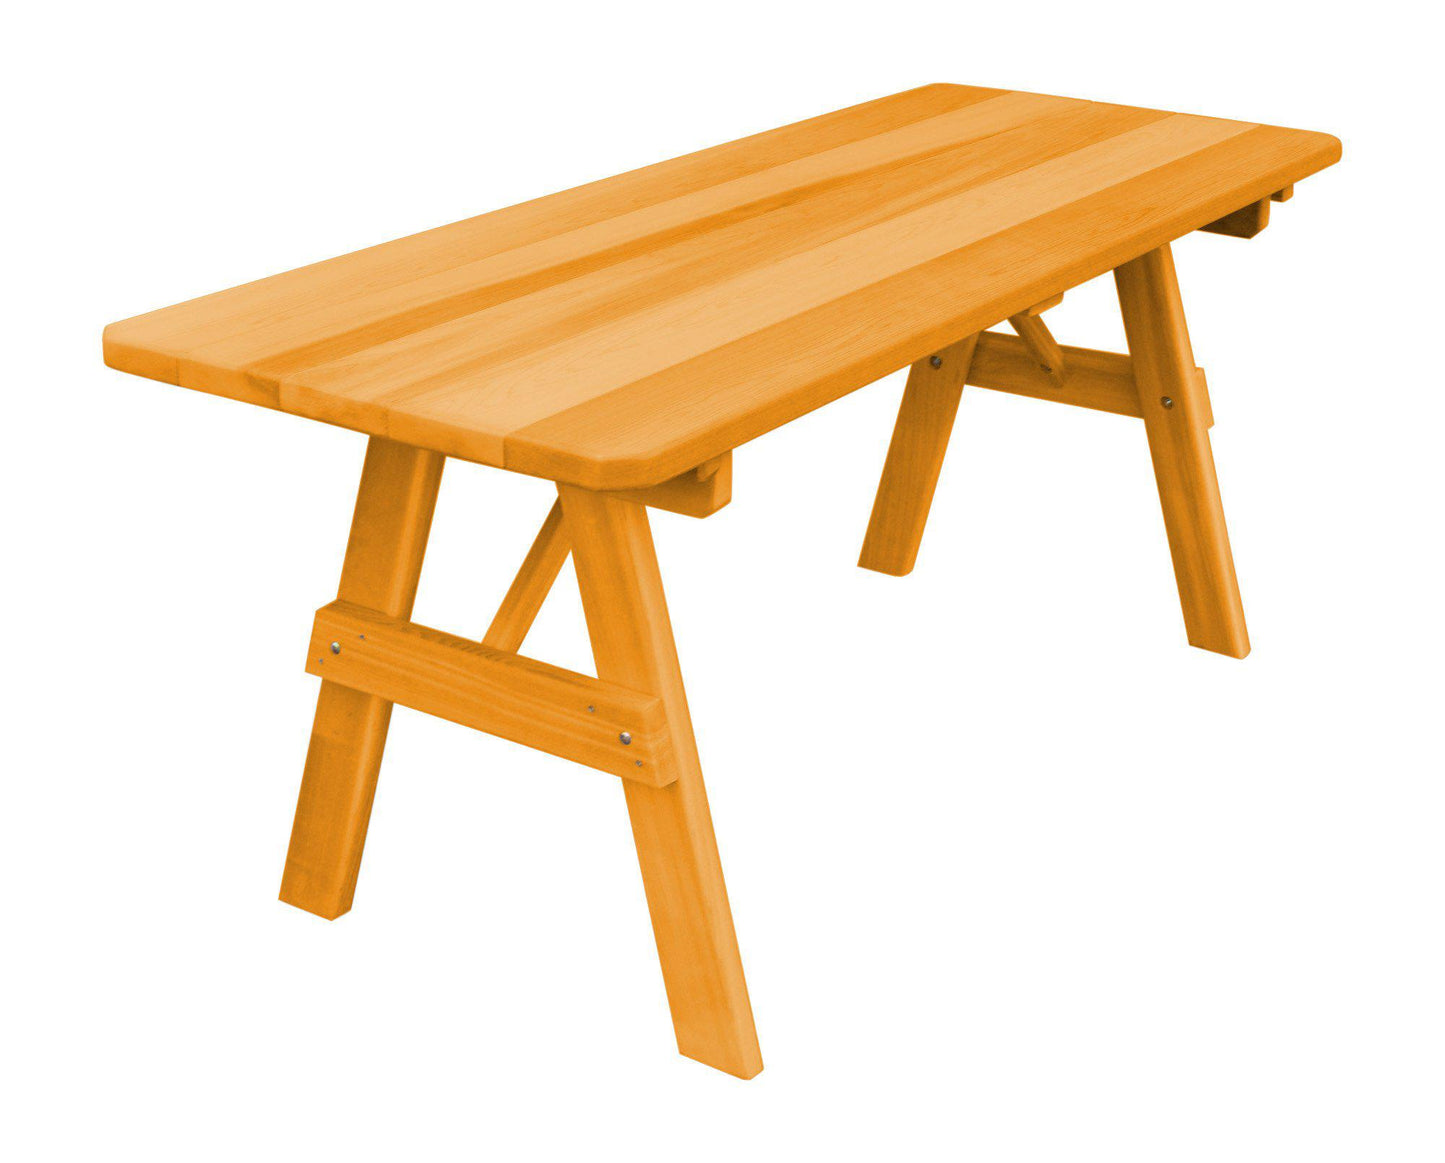 A&L FURNITURE CO. Western Red Cedar 55" Traditional Table Only - Specify for FREE 2" Umbrella Hole - LEAD TIME TO SHIP 2 WEEKS